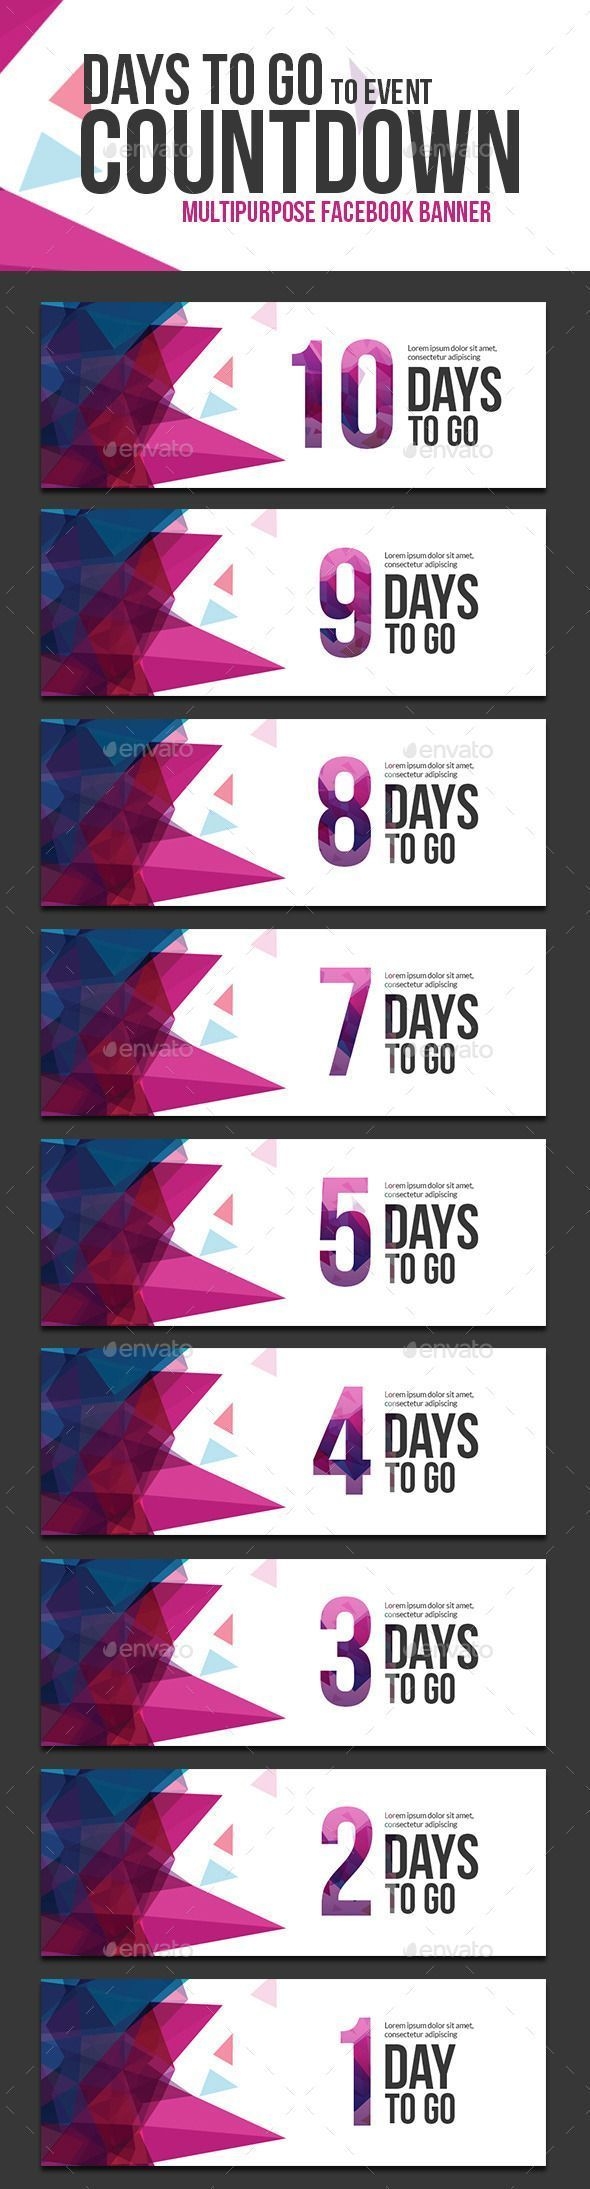 Days To Go Countdown Web Banner Template #design Download